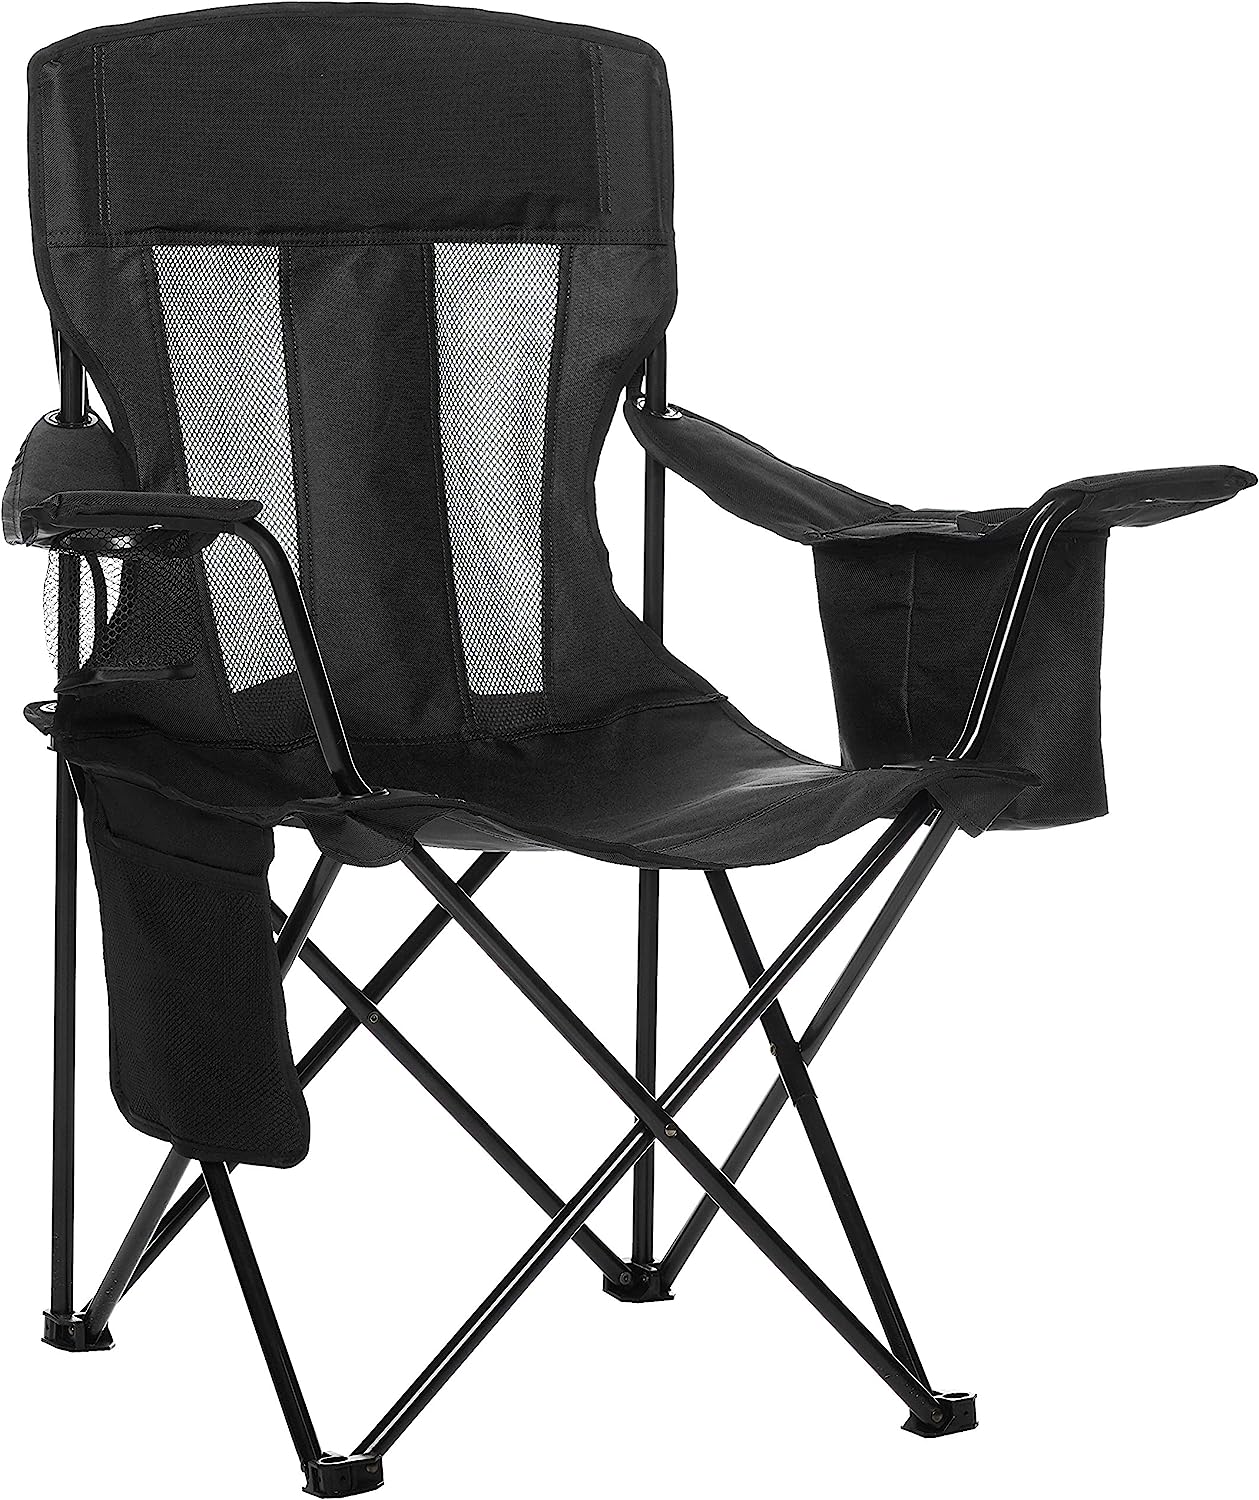 Amazon Basics Portable Folding Camping Chair with [...]